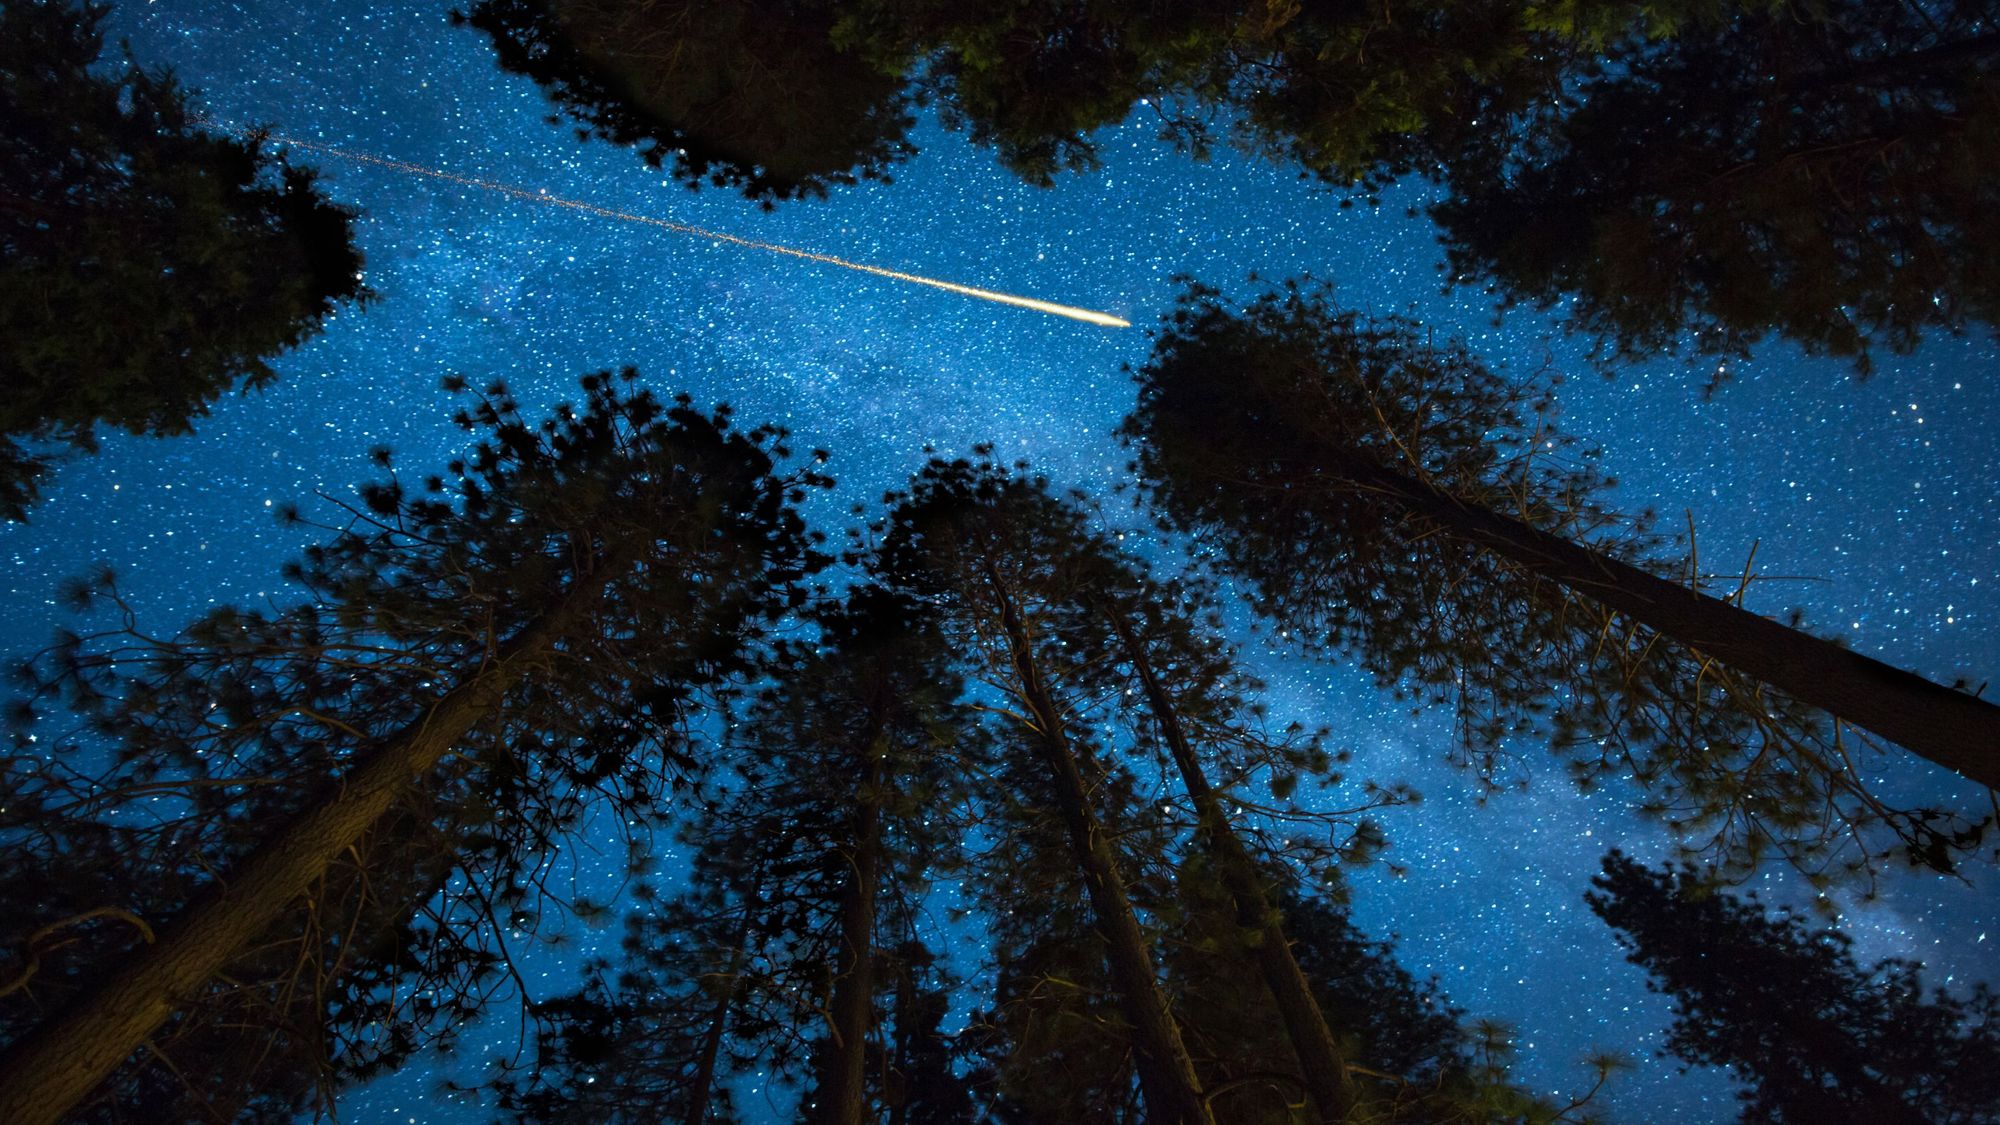 A night sky in the forest, with a shooting star blazing a trail through the stars.